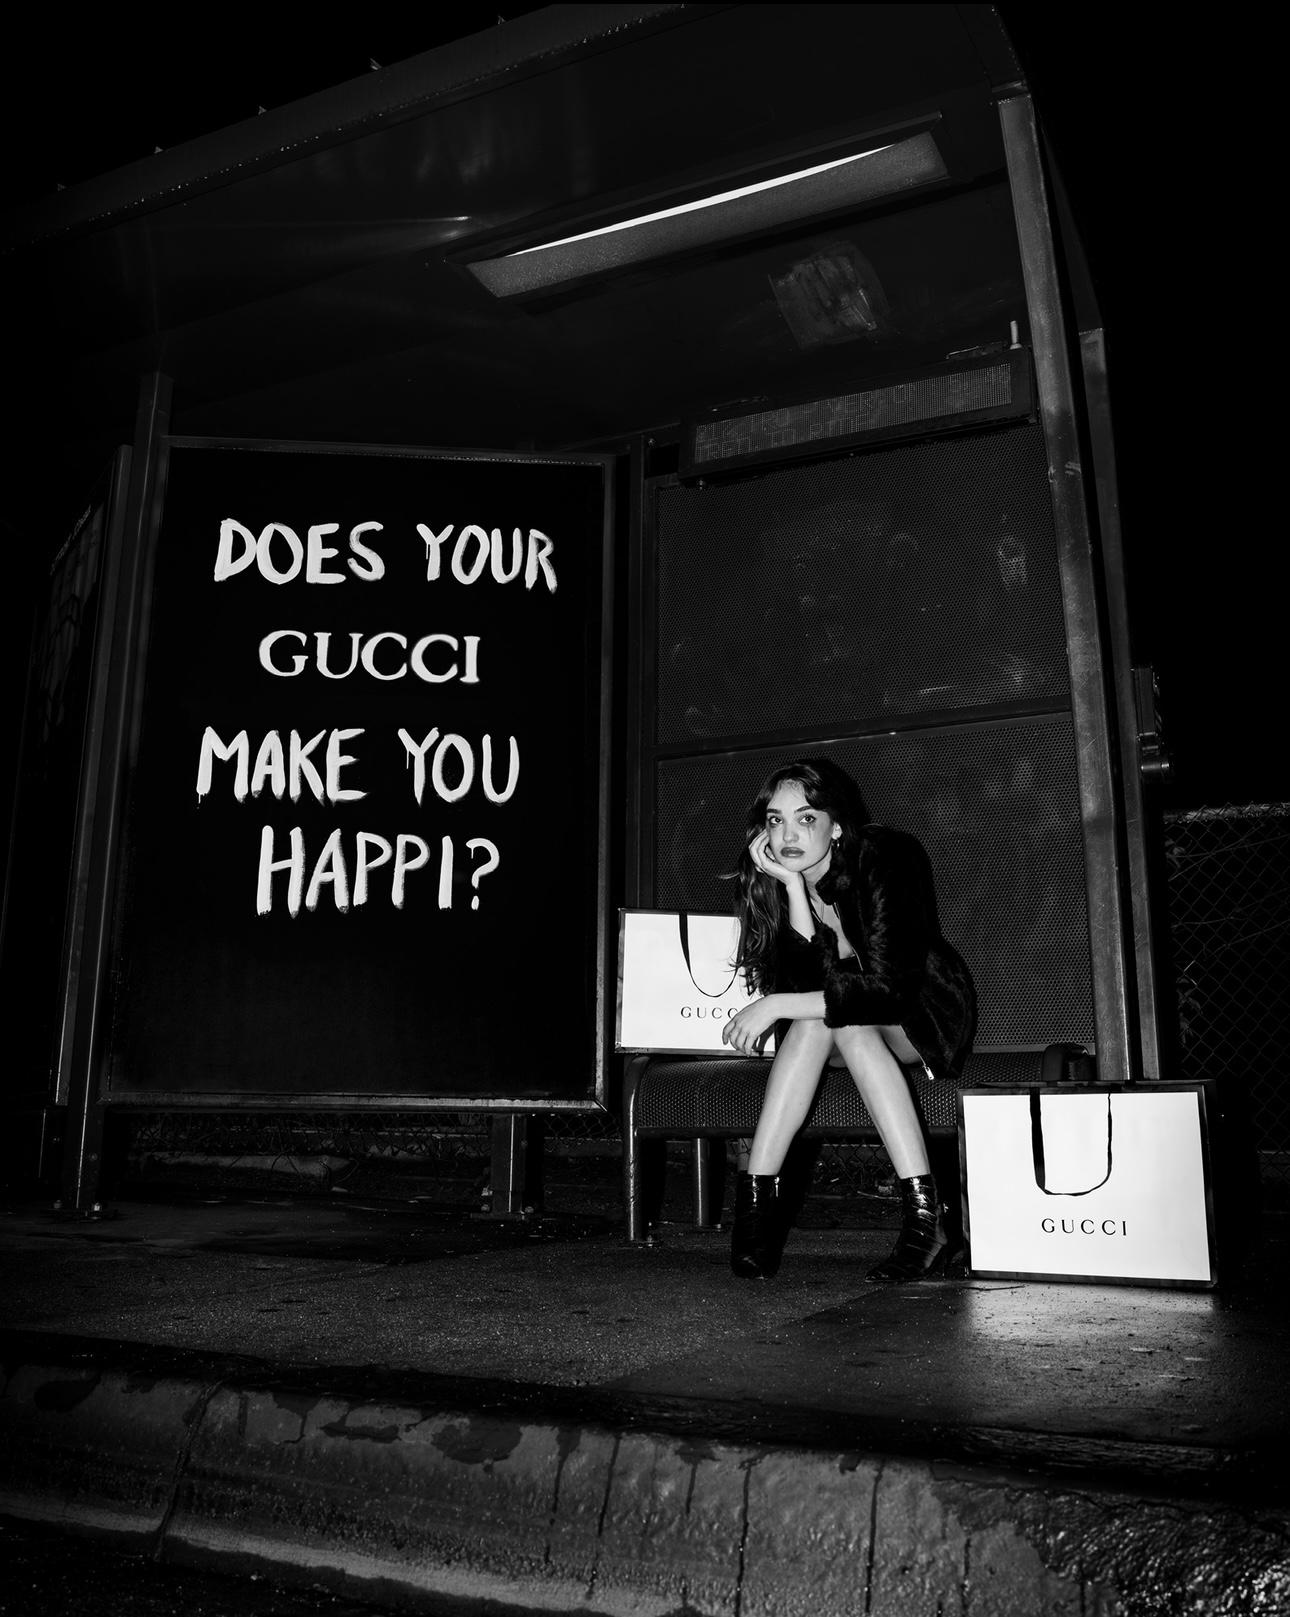 "Does your Gucci Make You Happi?" Photography 30x24 in Ed. 2/7 by Brendan North

From “Painted Poetry” series:
“Painted Poetry” is a collection of 40 photographs created over 4 years and was my first step into conceptual photography.
They say a